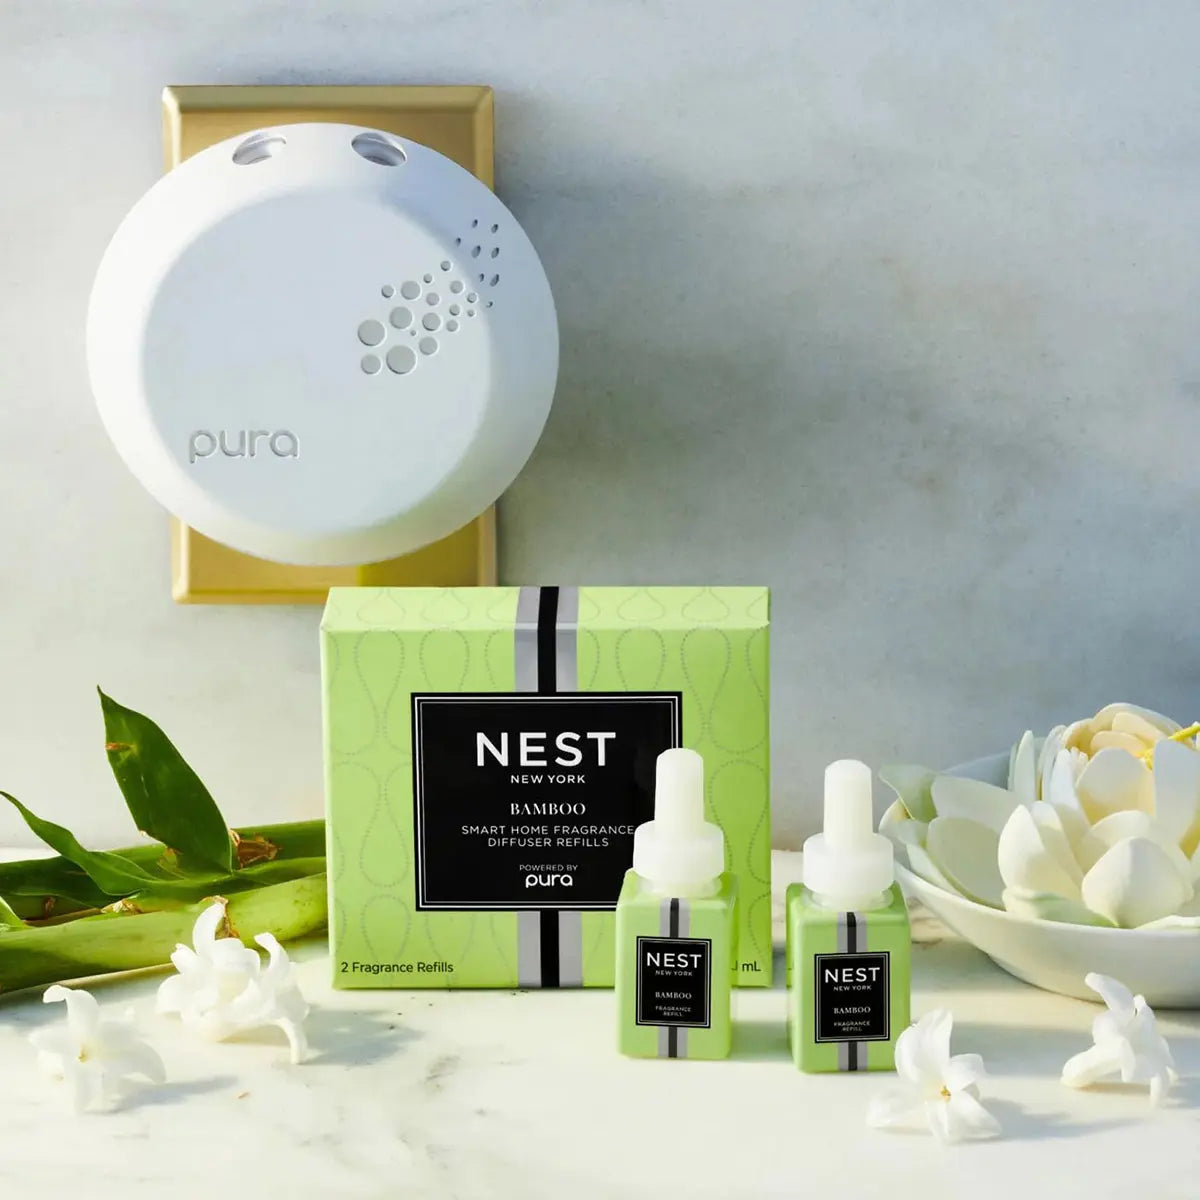 Nest Fragrances Bamboo Pura Smart Diffuser Refill Set of 2 plugged in the wall with the two refills on the table.